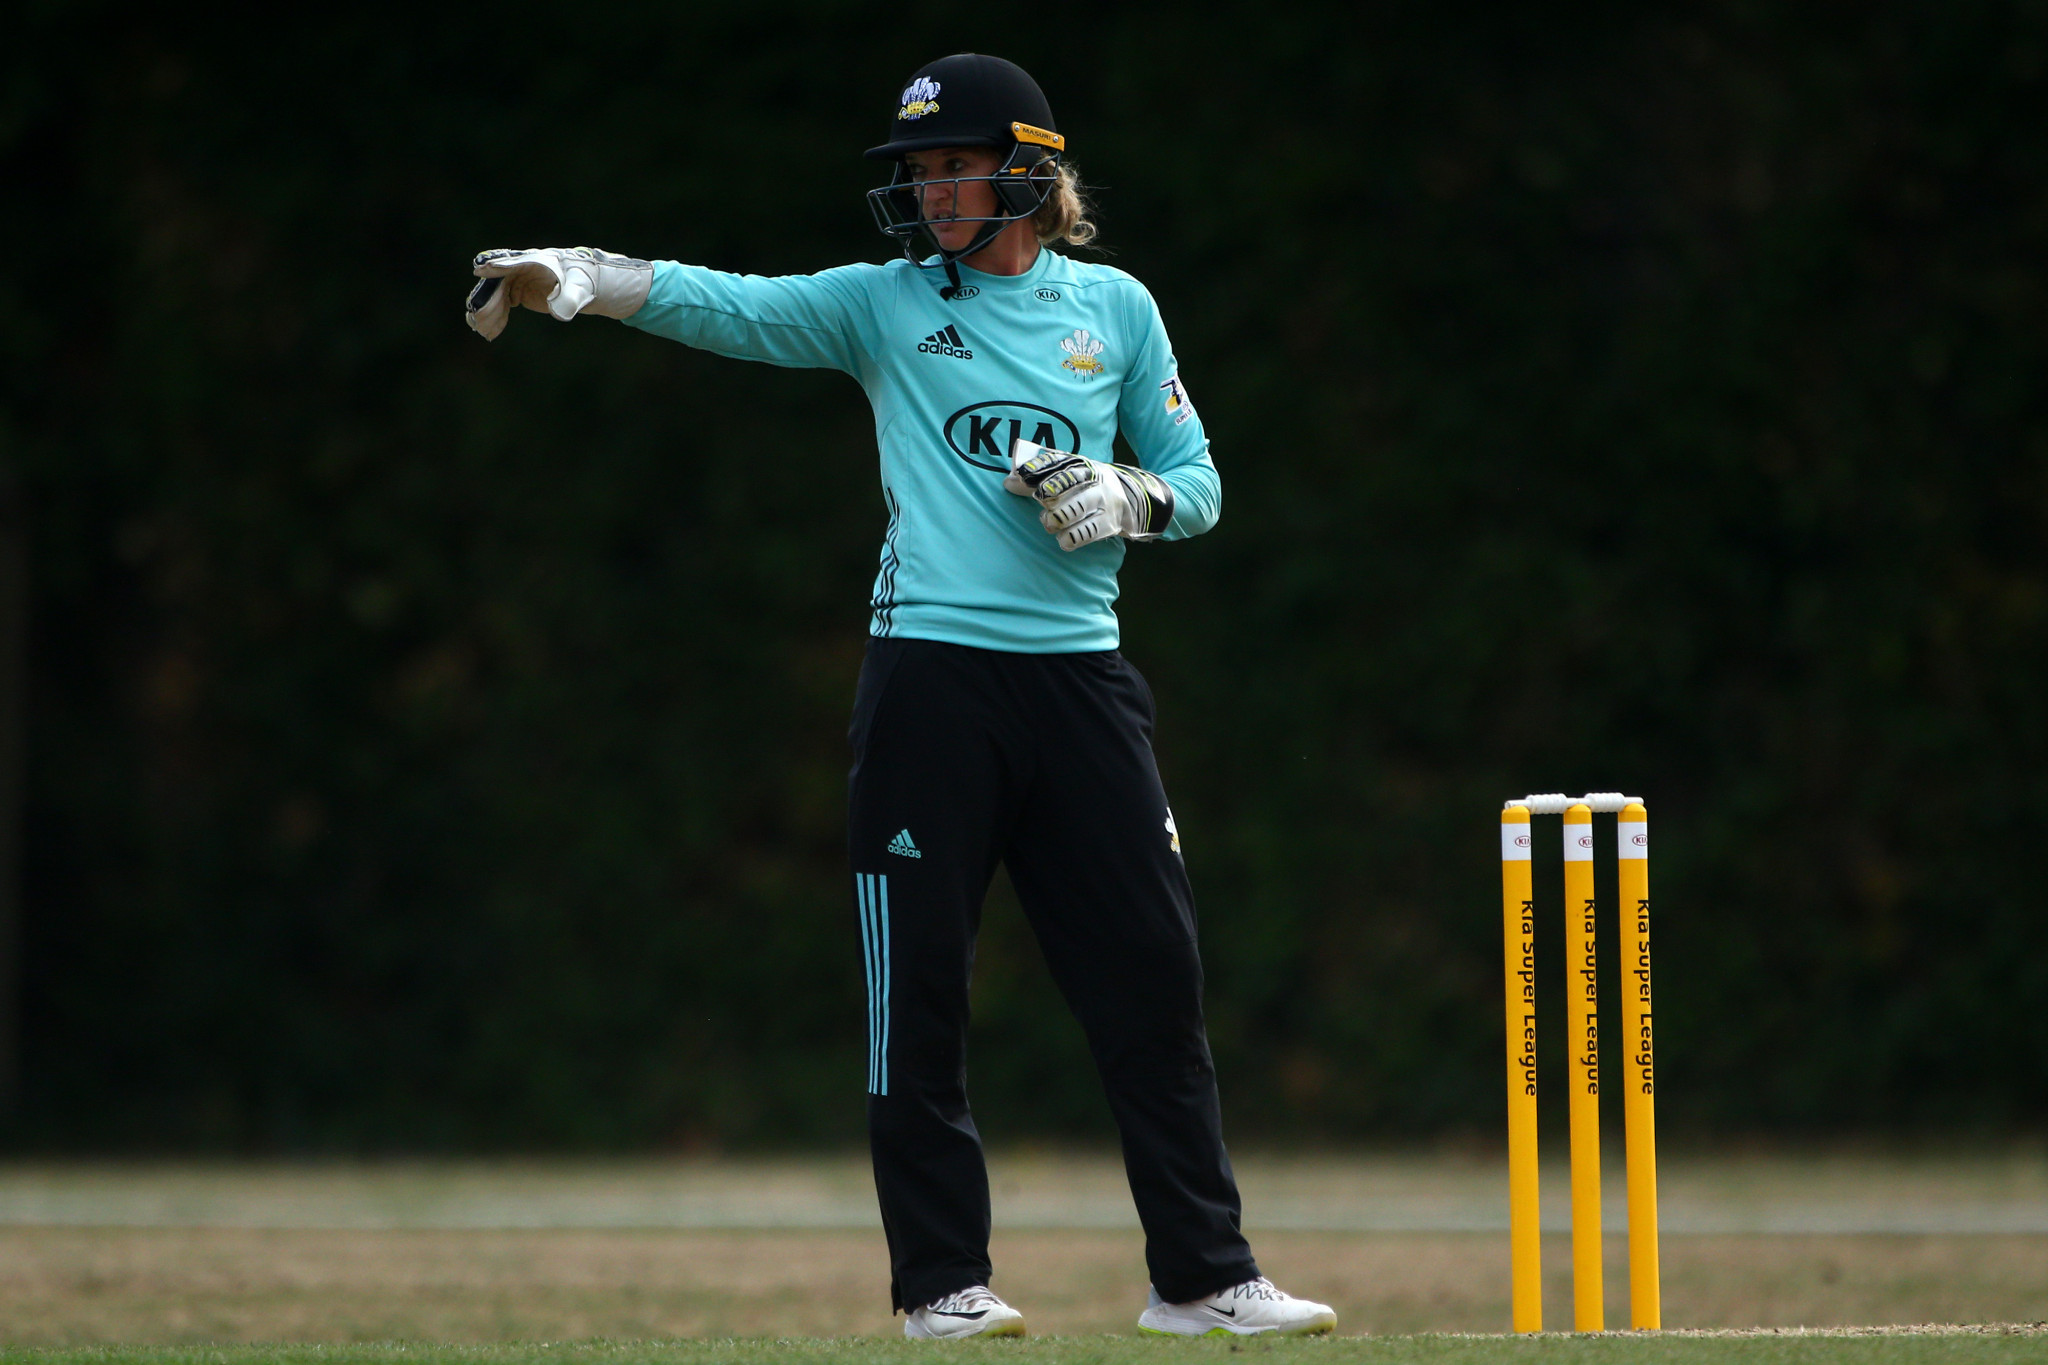 Sarah Taylor will continue to train but will not participate in the ICC Women's World T20 ©Getty Images